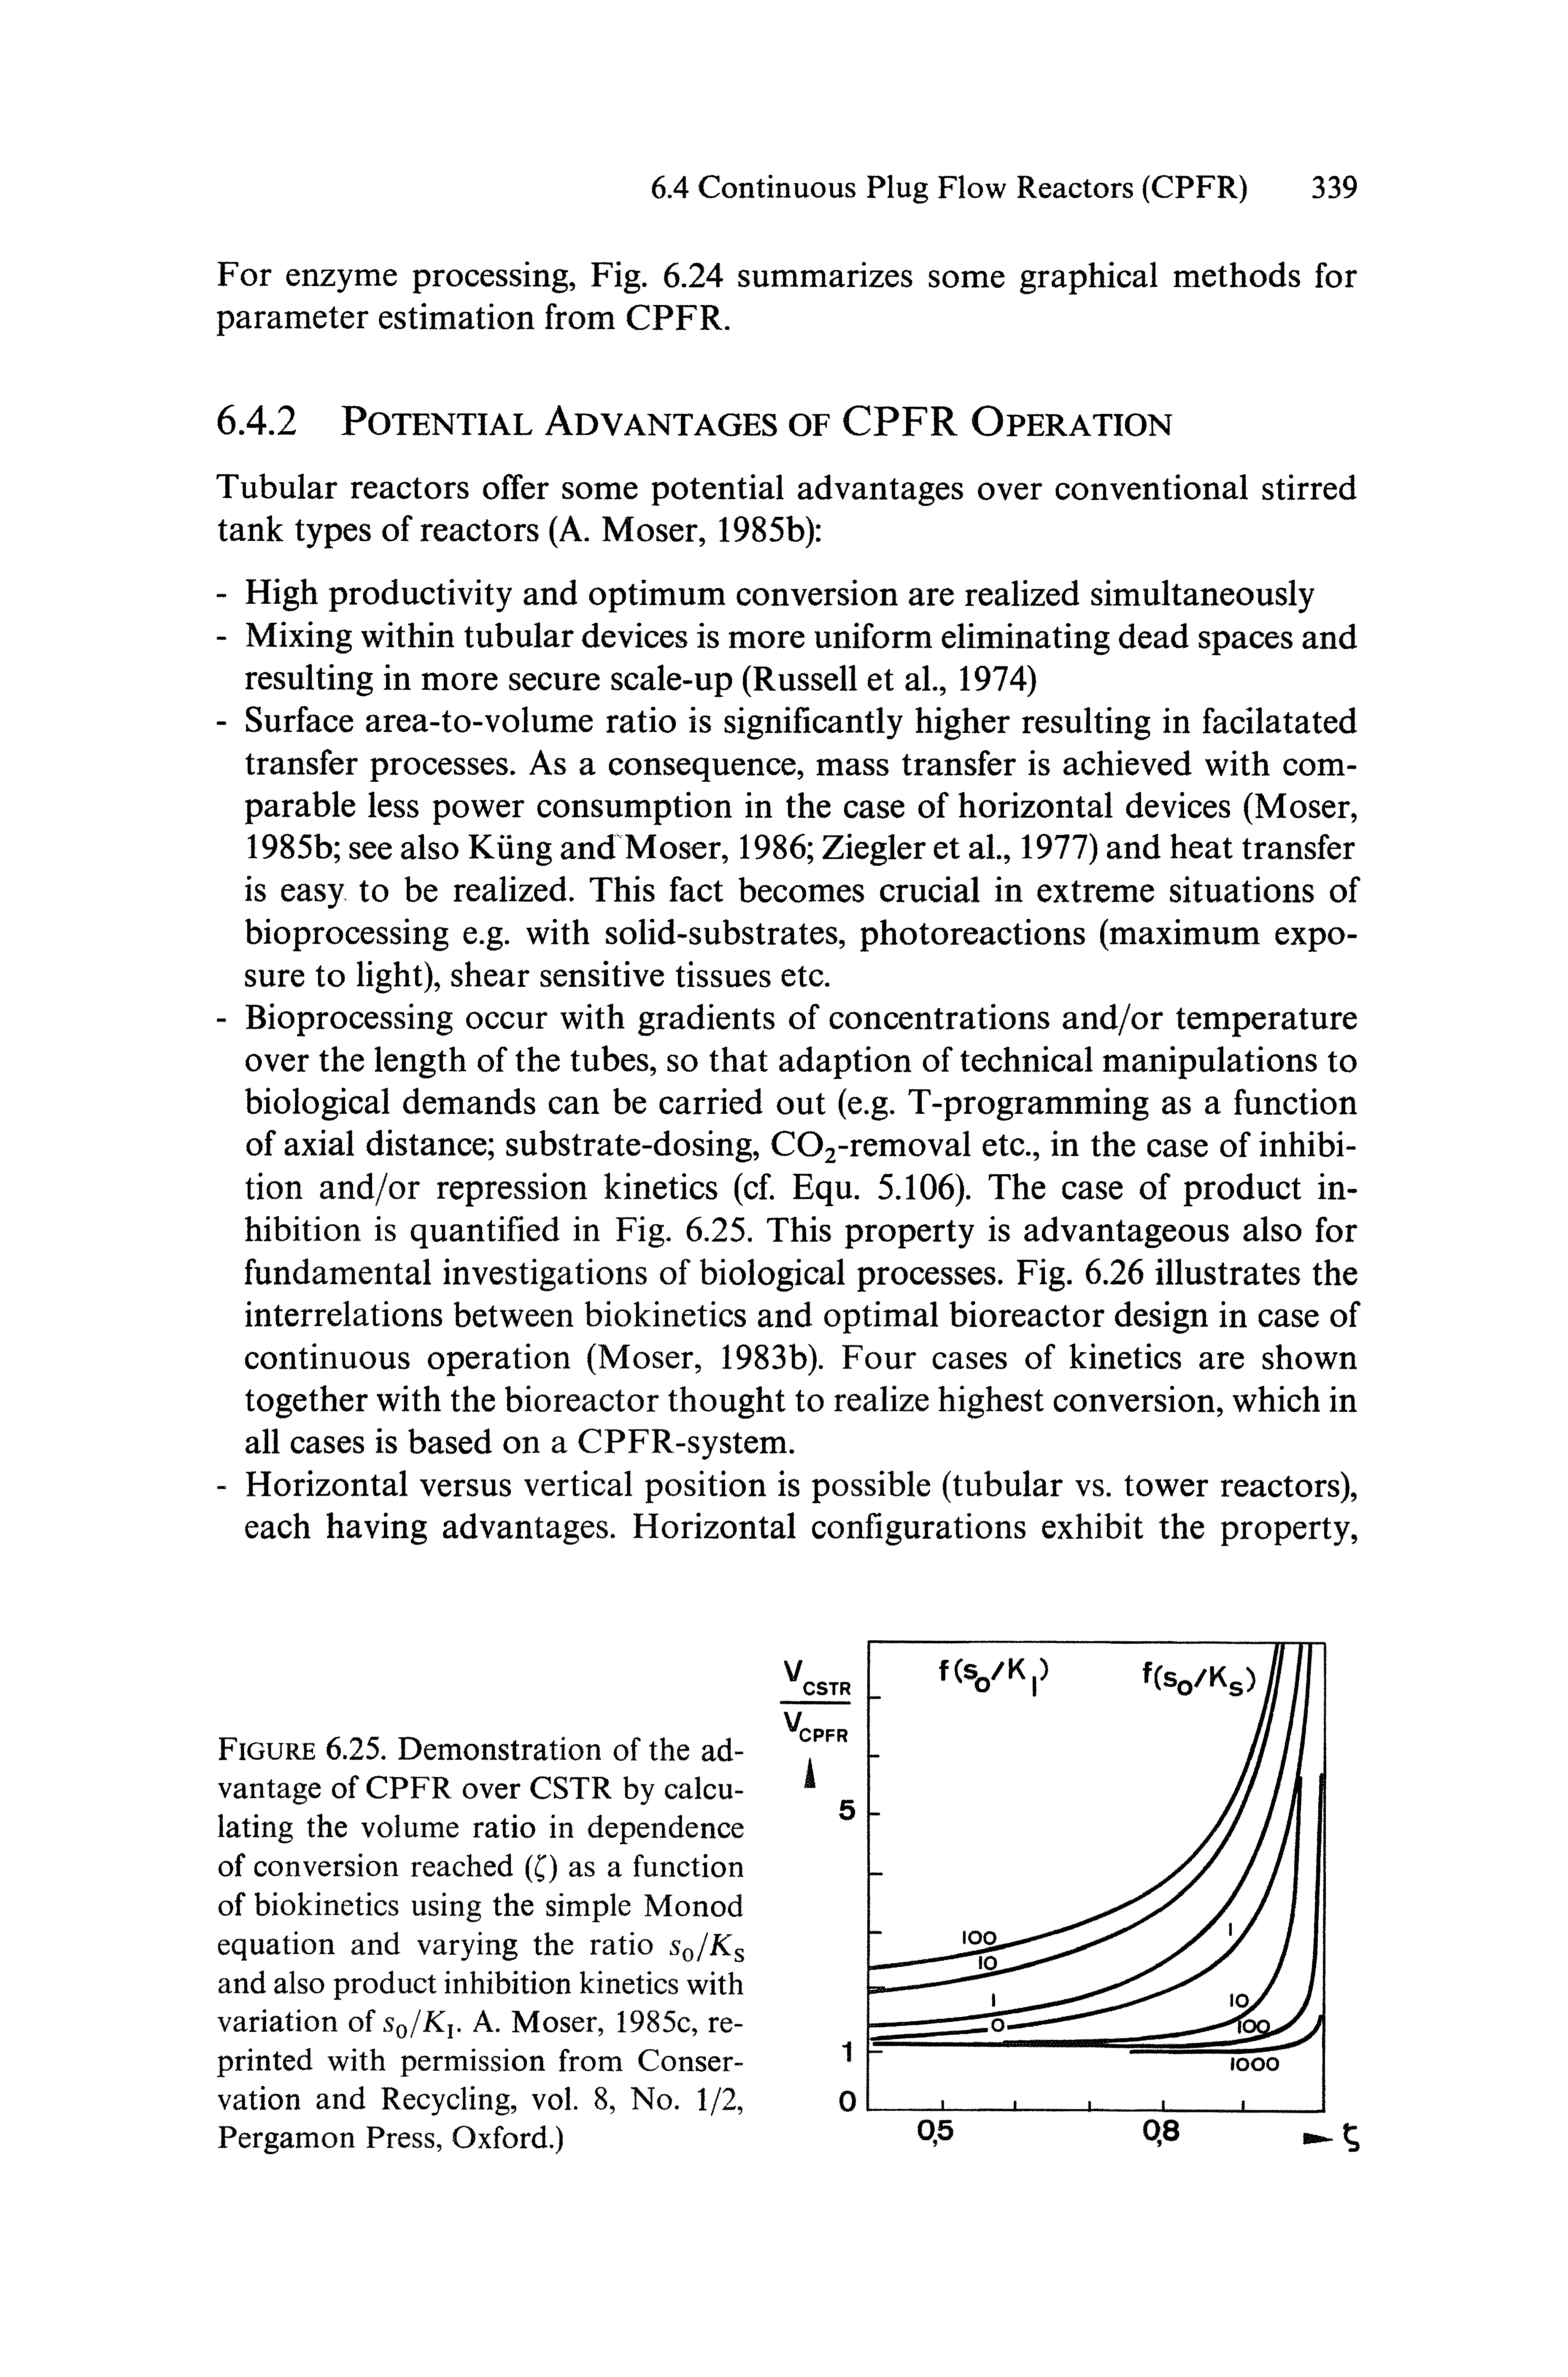 Figure 6.25. Demonstration of the advantage of CPFR over CSTR by calculating the volume ratio in dependence of conversion reached (C) as a function of biokinetics using the simple Monod equation and varying the ratio Sq/K and also product inhibition kinetics with variation of Sq/Kj. A. Moser, 1985c, reprinted with permission from Conservation and Recycling, vol. 8, No. 1/2, Pergamon Press, Oxford.)...